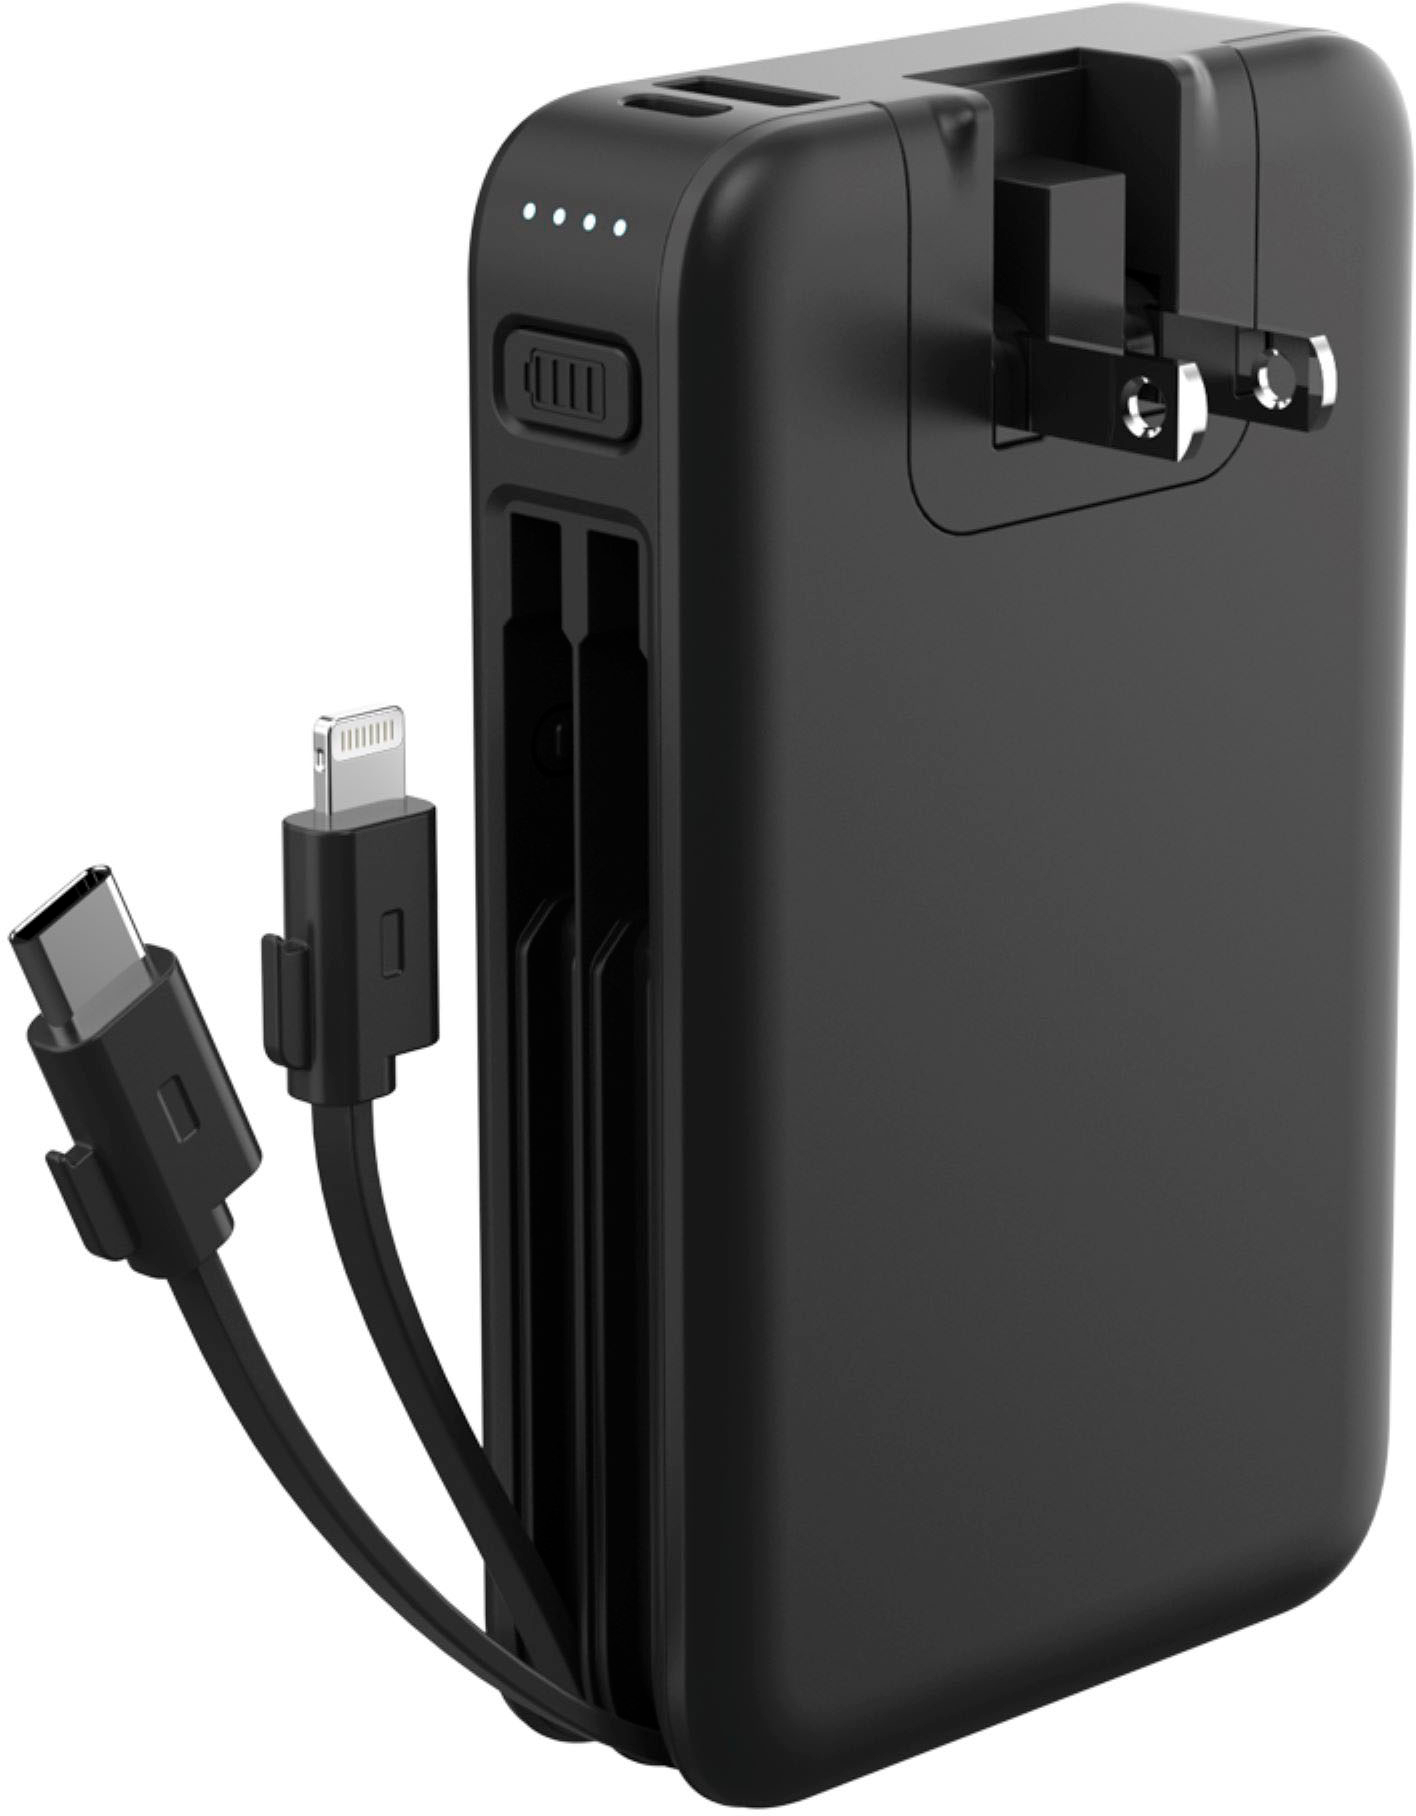 Angle View: myCharge - POWERHUB ULTRA 20,000mAh Everything Built-In Portable Charge for Most USB Enables Devices - Black